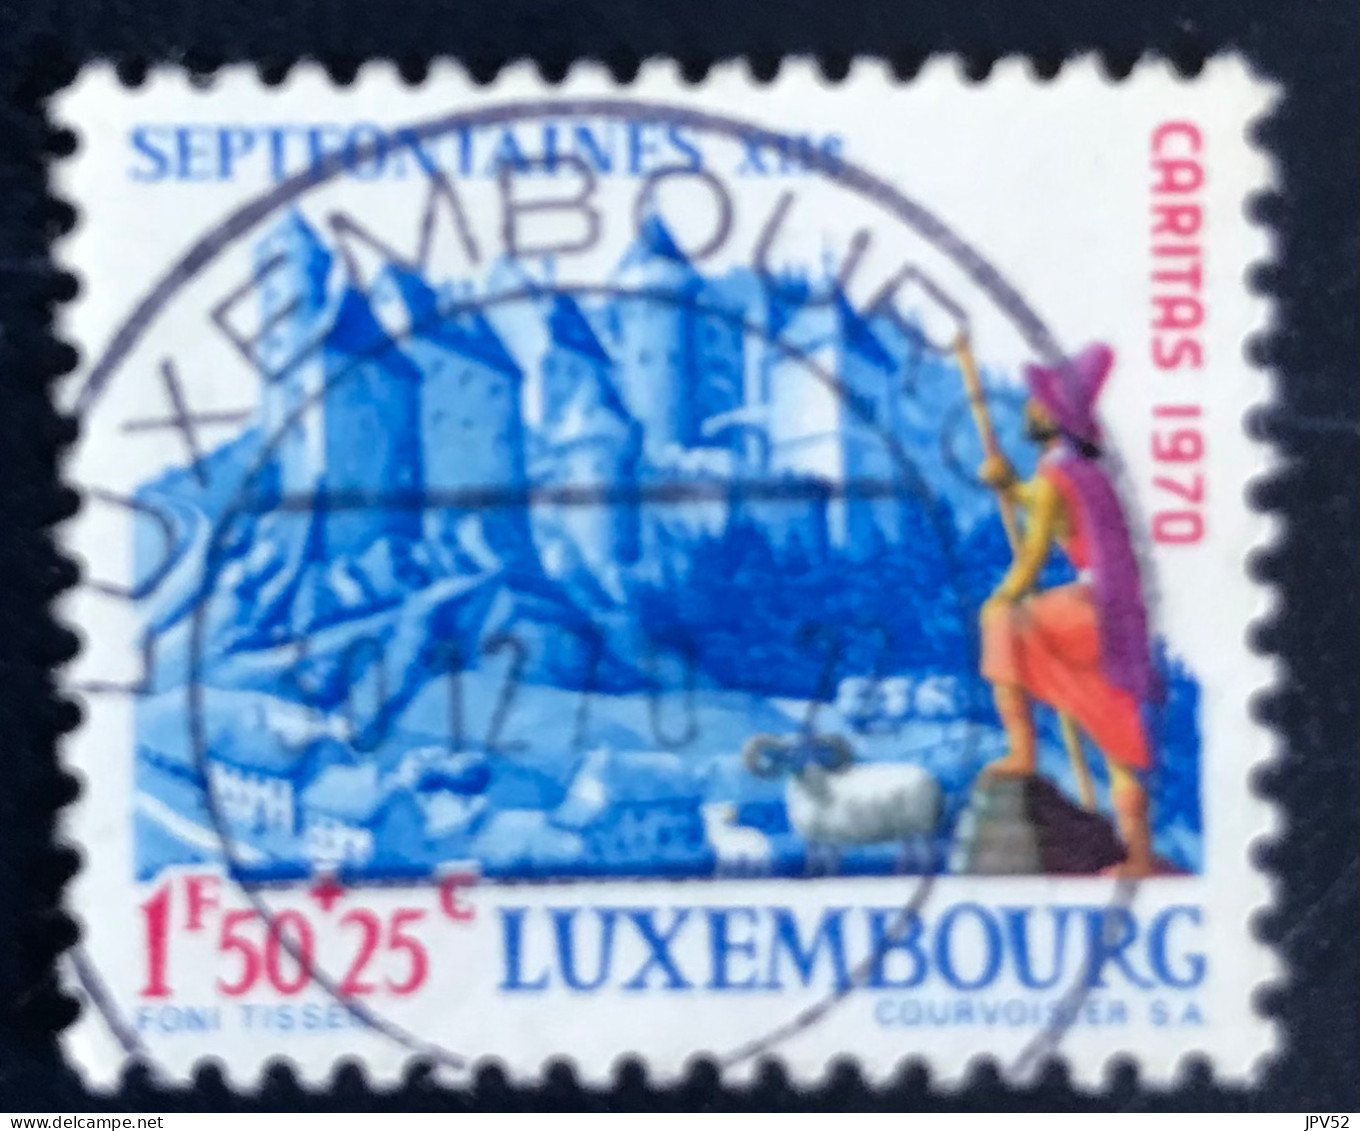 Luxembourg - Luxemburg - C18/34 - 1970 - (°)used - Michel 815 - Burcht Van Septfontaines - LUXEMBOURG - Used Stamps